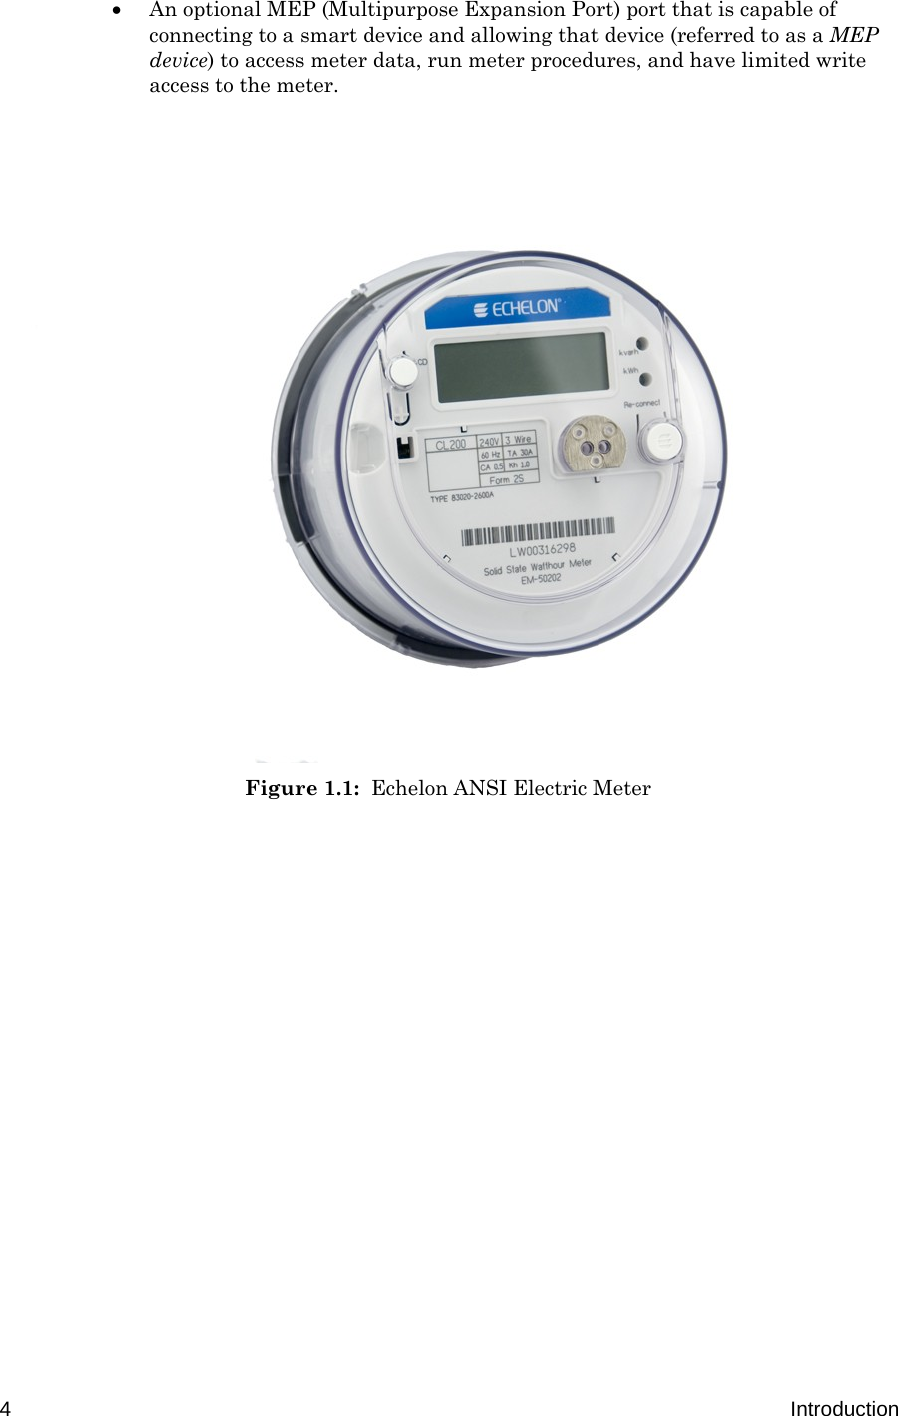  4  Introduction  An optional MEP (Multipurpose Expansion Port) port that is capable of connecting to a smart device and allowing that device (referred to as a MEP device) to access meter data, run meter procedures, and have limited write access to the meter.                    Figure 1.1:  Echelon ANSI Electric Meter             